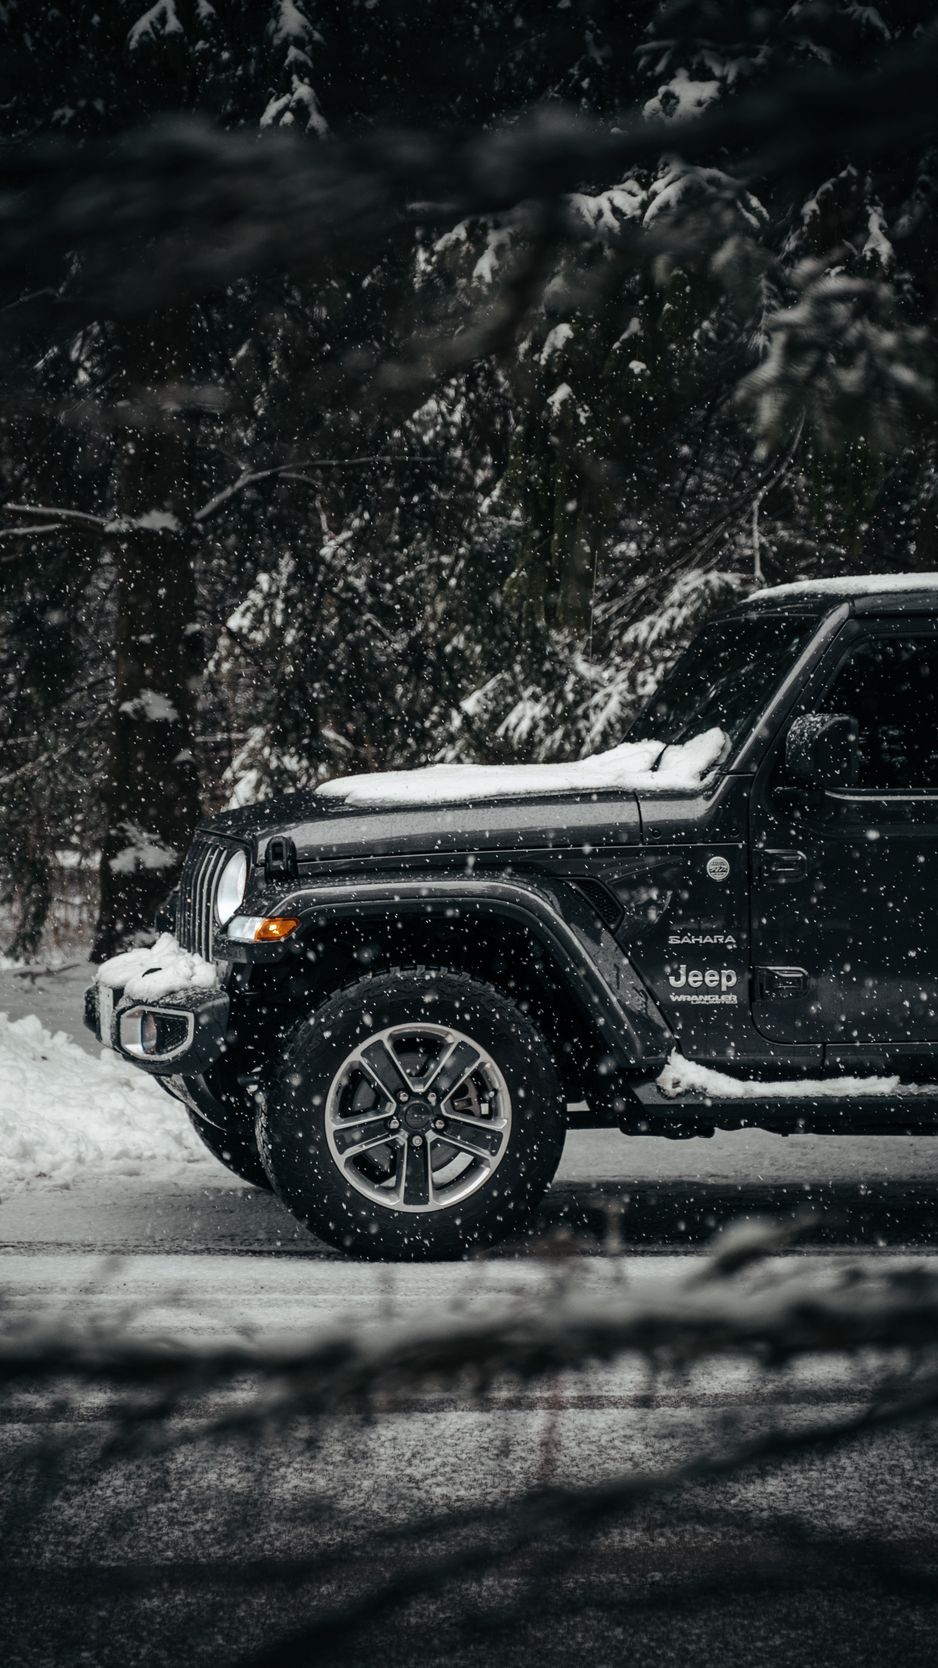 Download Wallpaper 938x1668 Jeep Wrangler Jeep Car Suv Black Snow Iphone 8 7 6s 6 For Parallax Hd Background